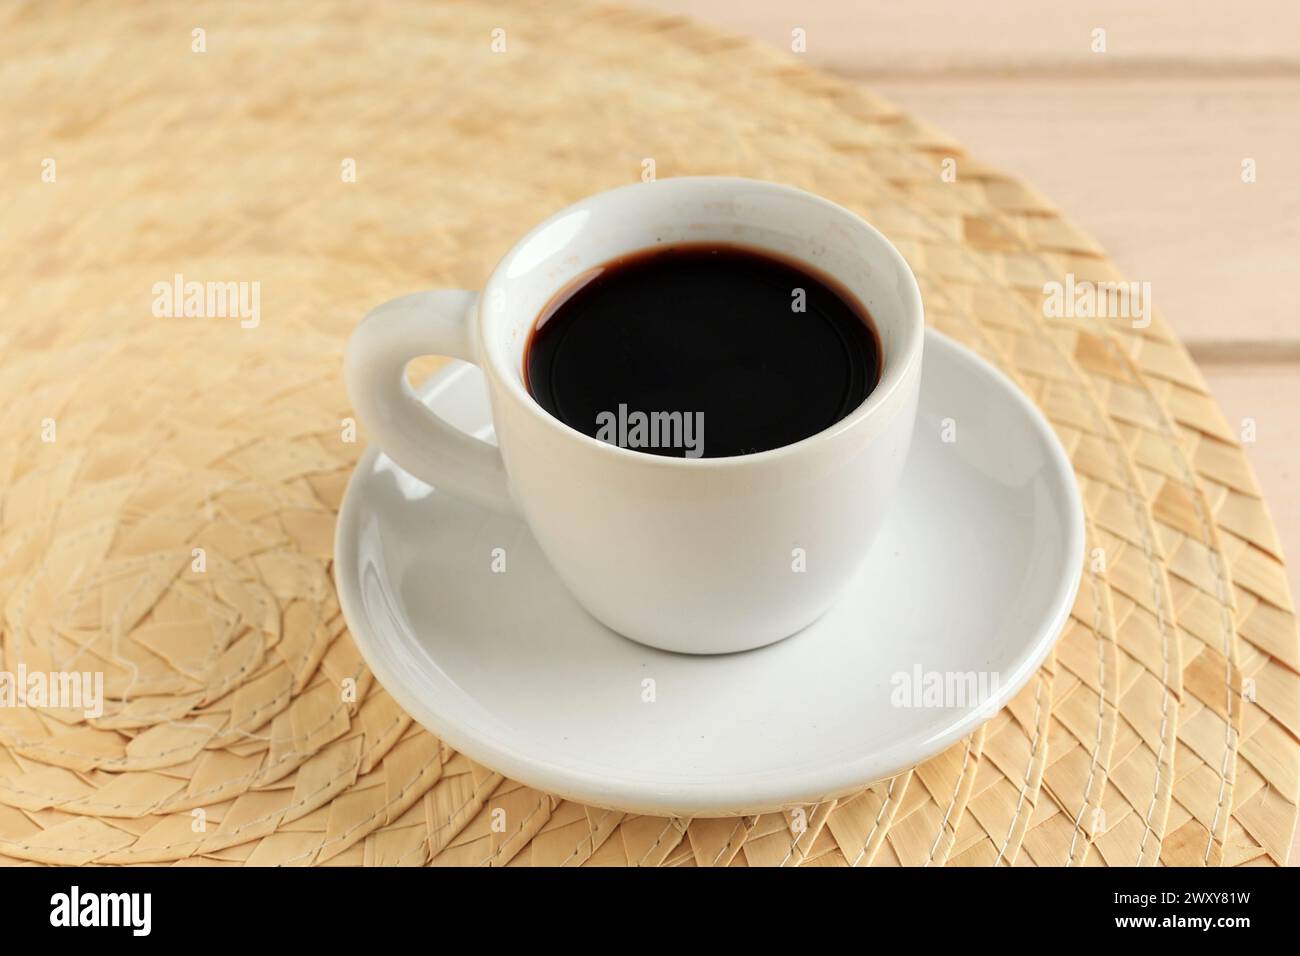 A Cup of Black Coffee on Wooden Table Stock Photo